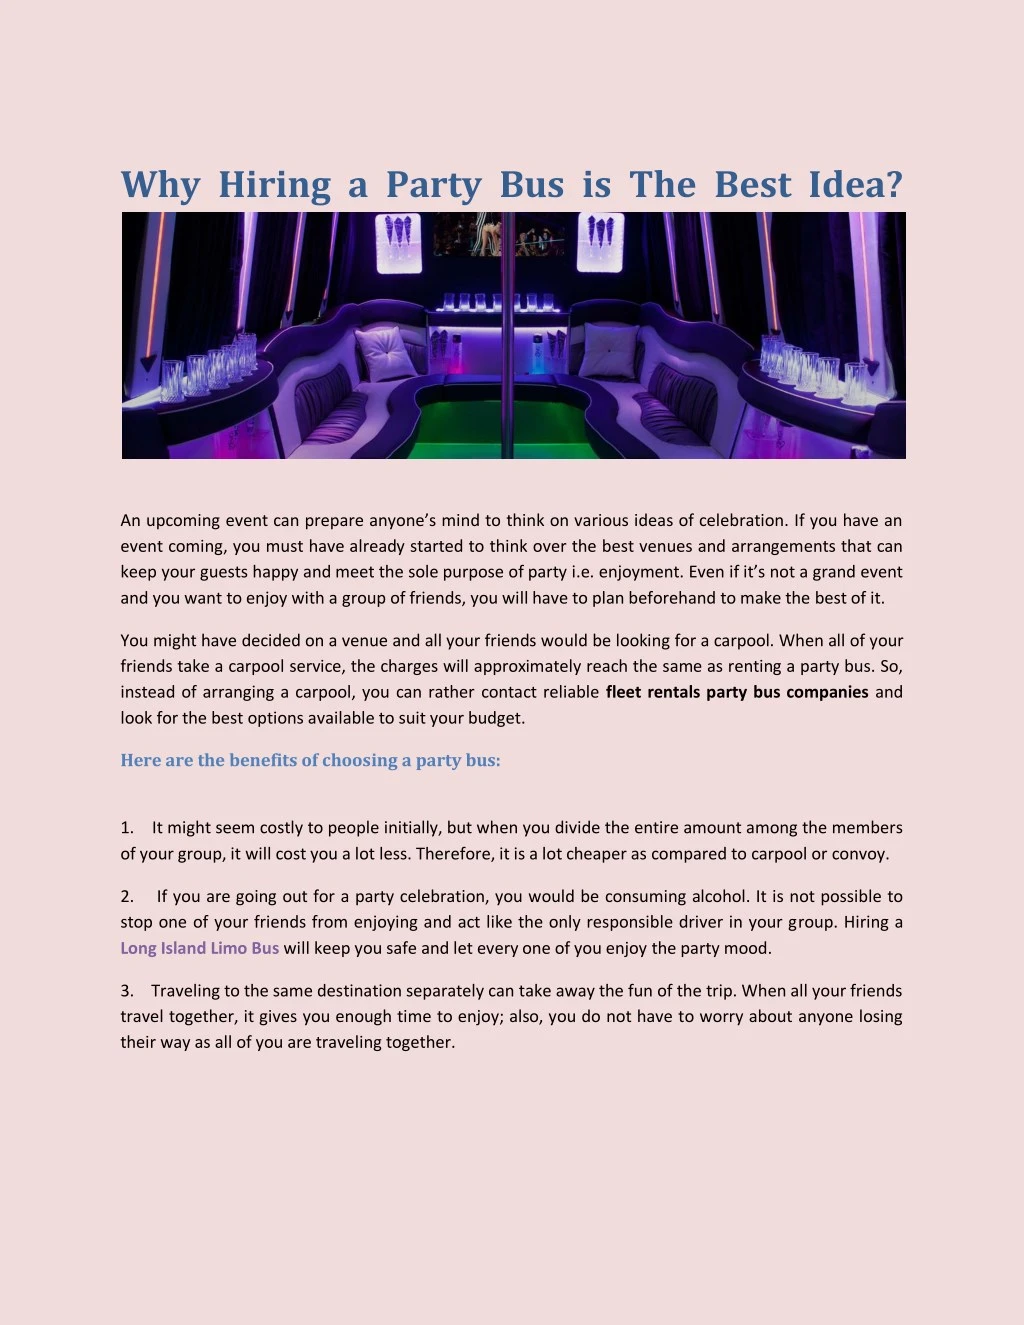 why hiring a party bus is the best idea